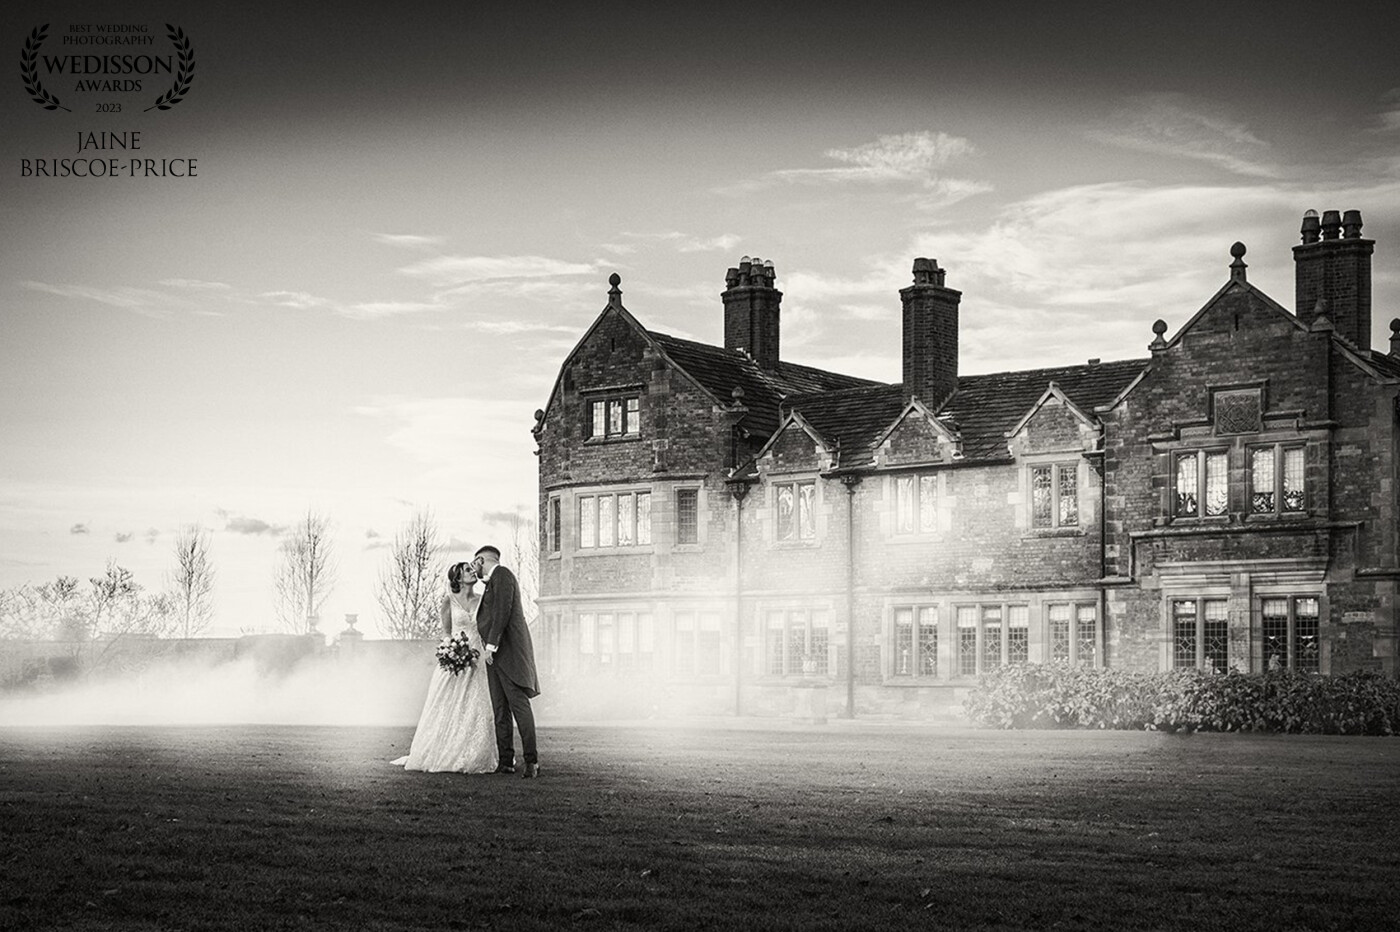 A December wedding at Colshaw Hall gave us this atmospheric shot (OK so we added some into the mix on the day) for Gemma & Matt to enjoy